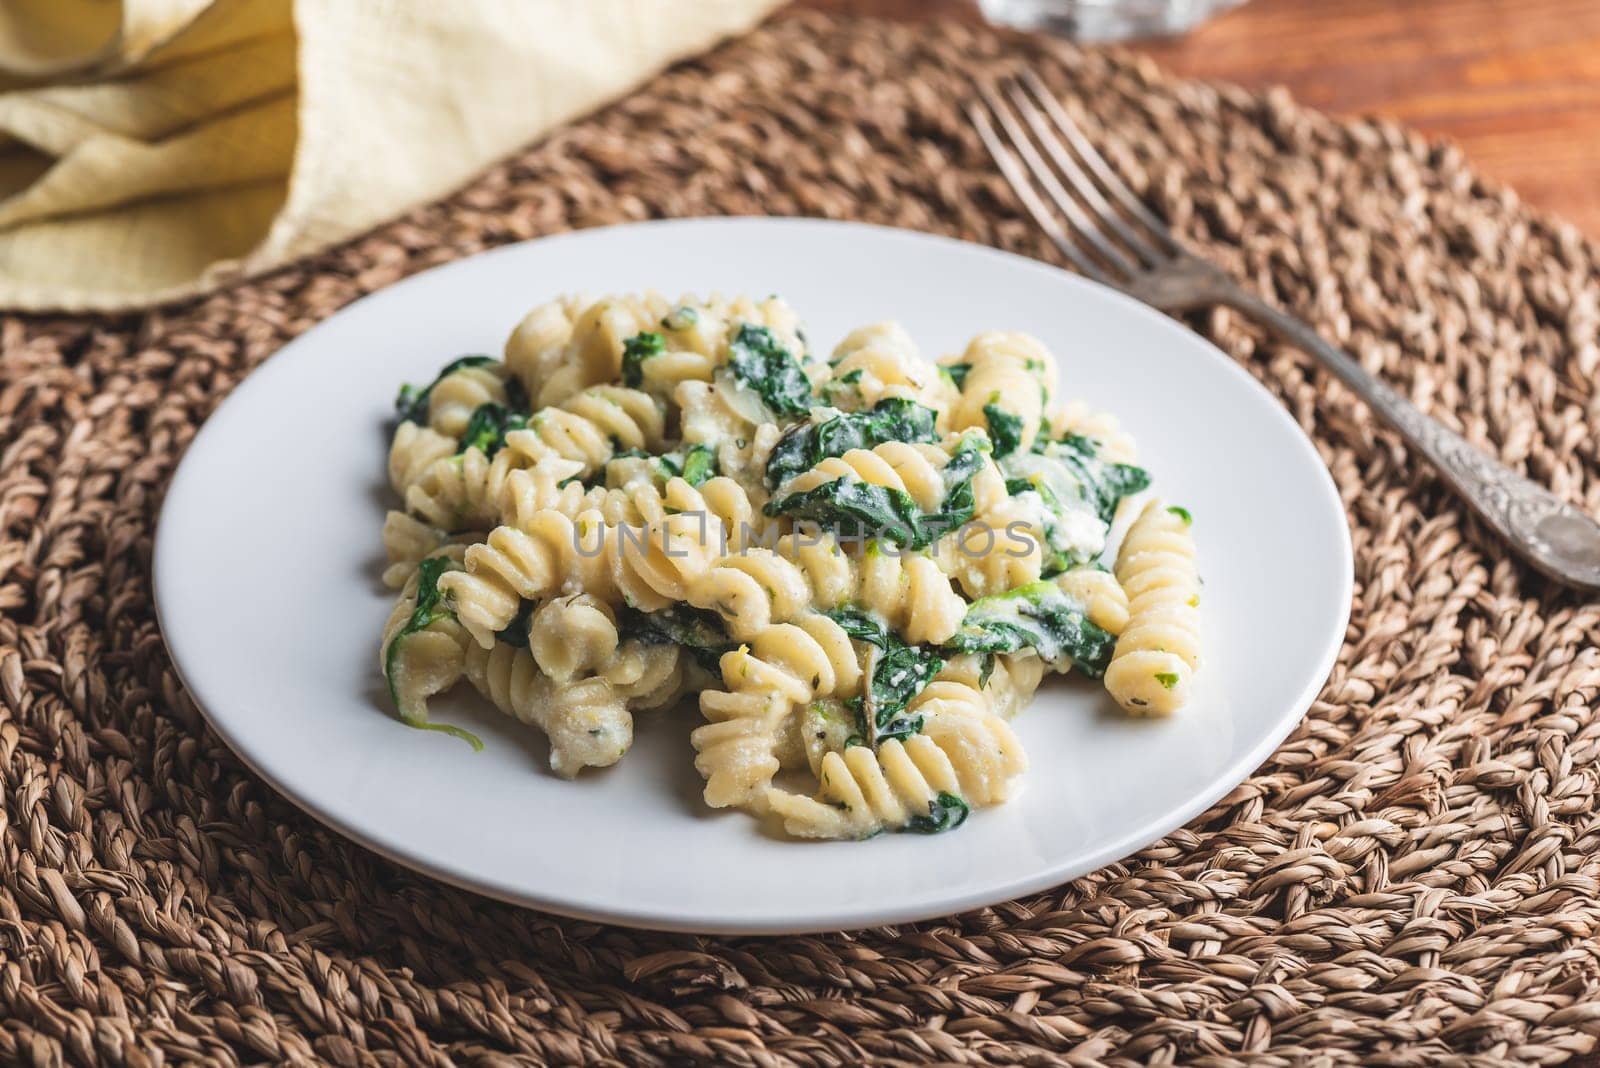 Spinach Pasta with Ricotta by Seva_blsv